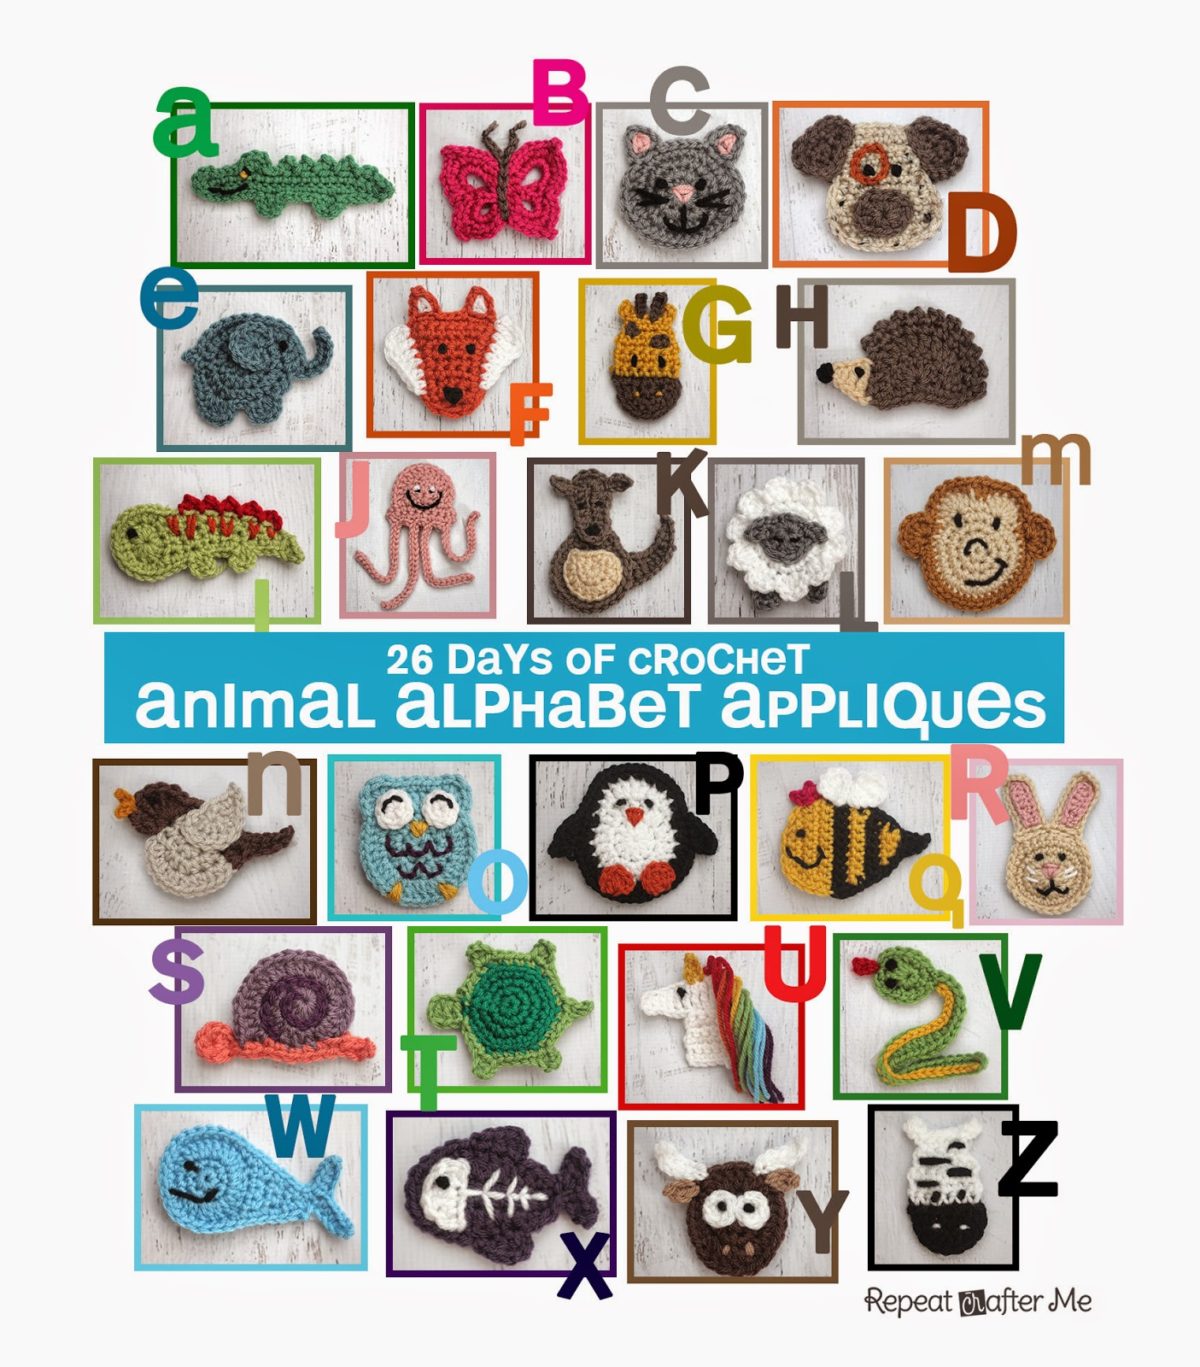 26 Days of Crochet Animal Alphabet Appliques - Repeat Crafter Me